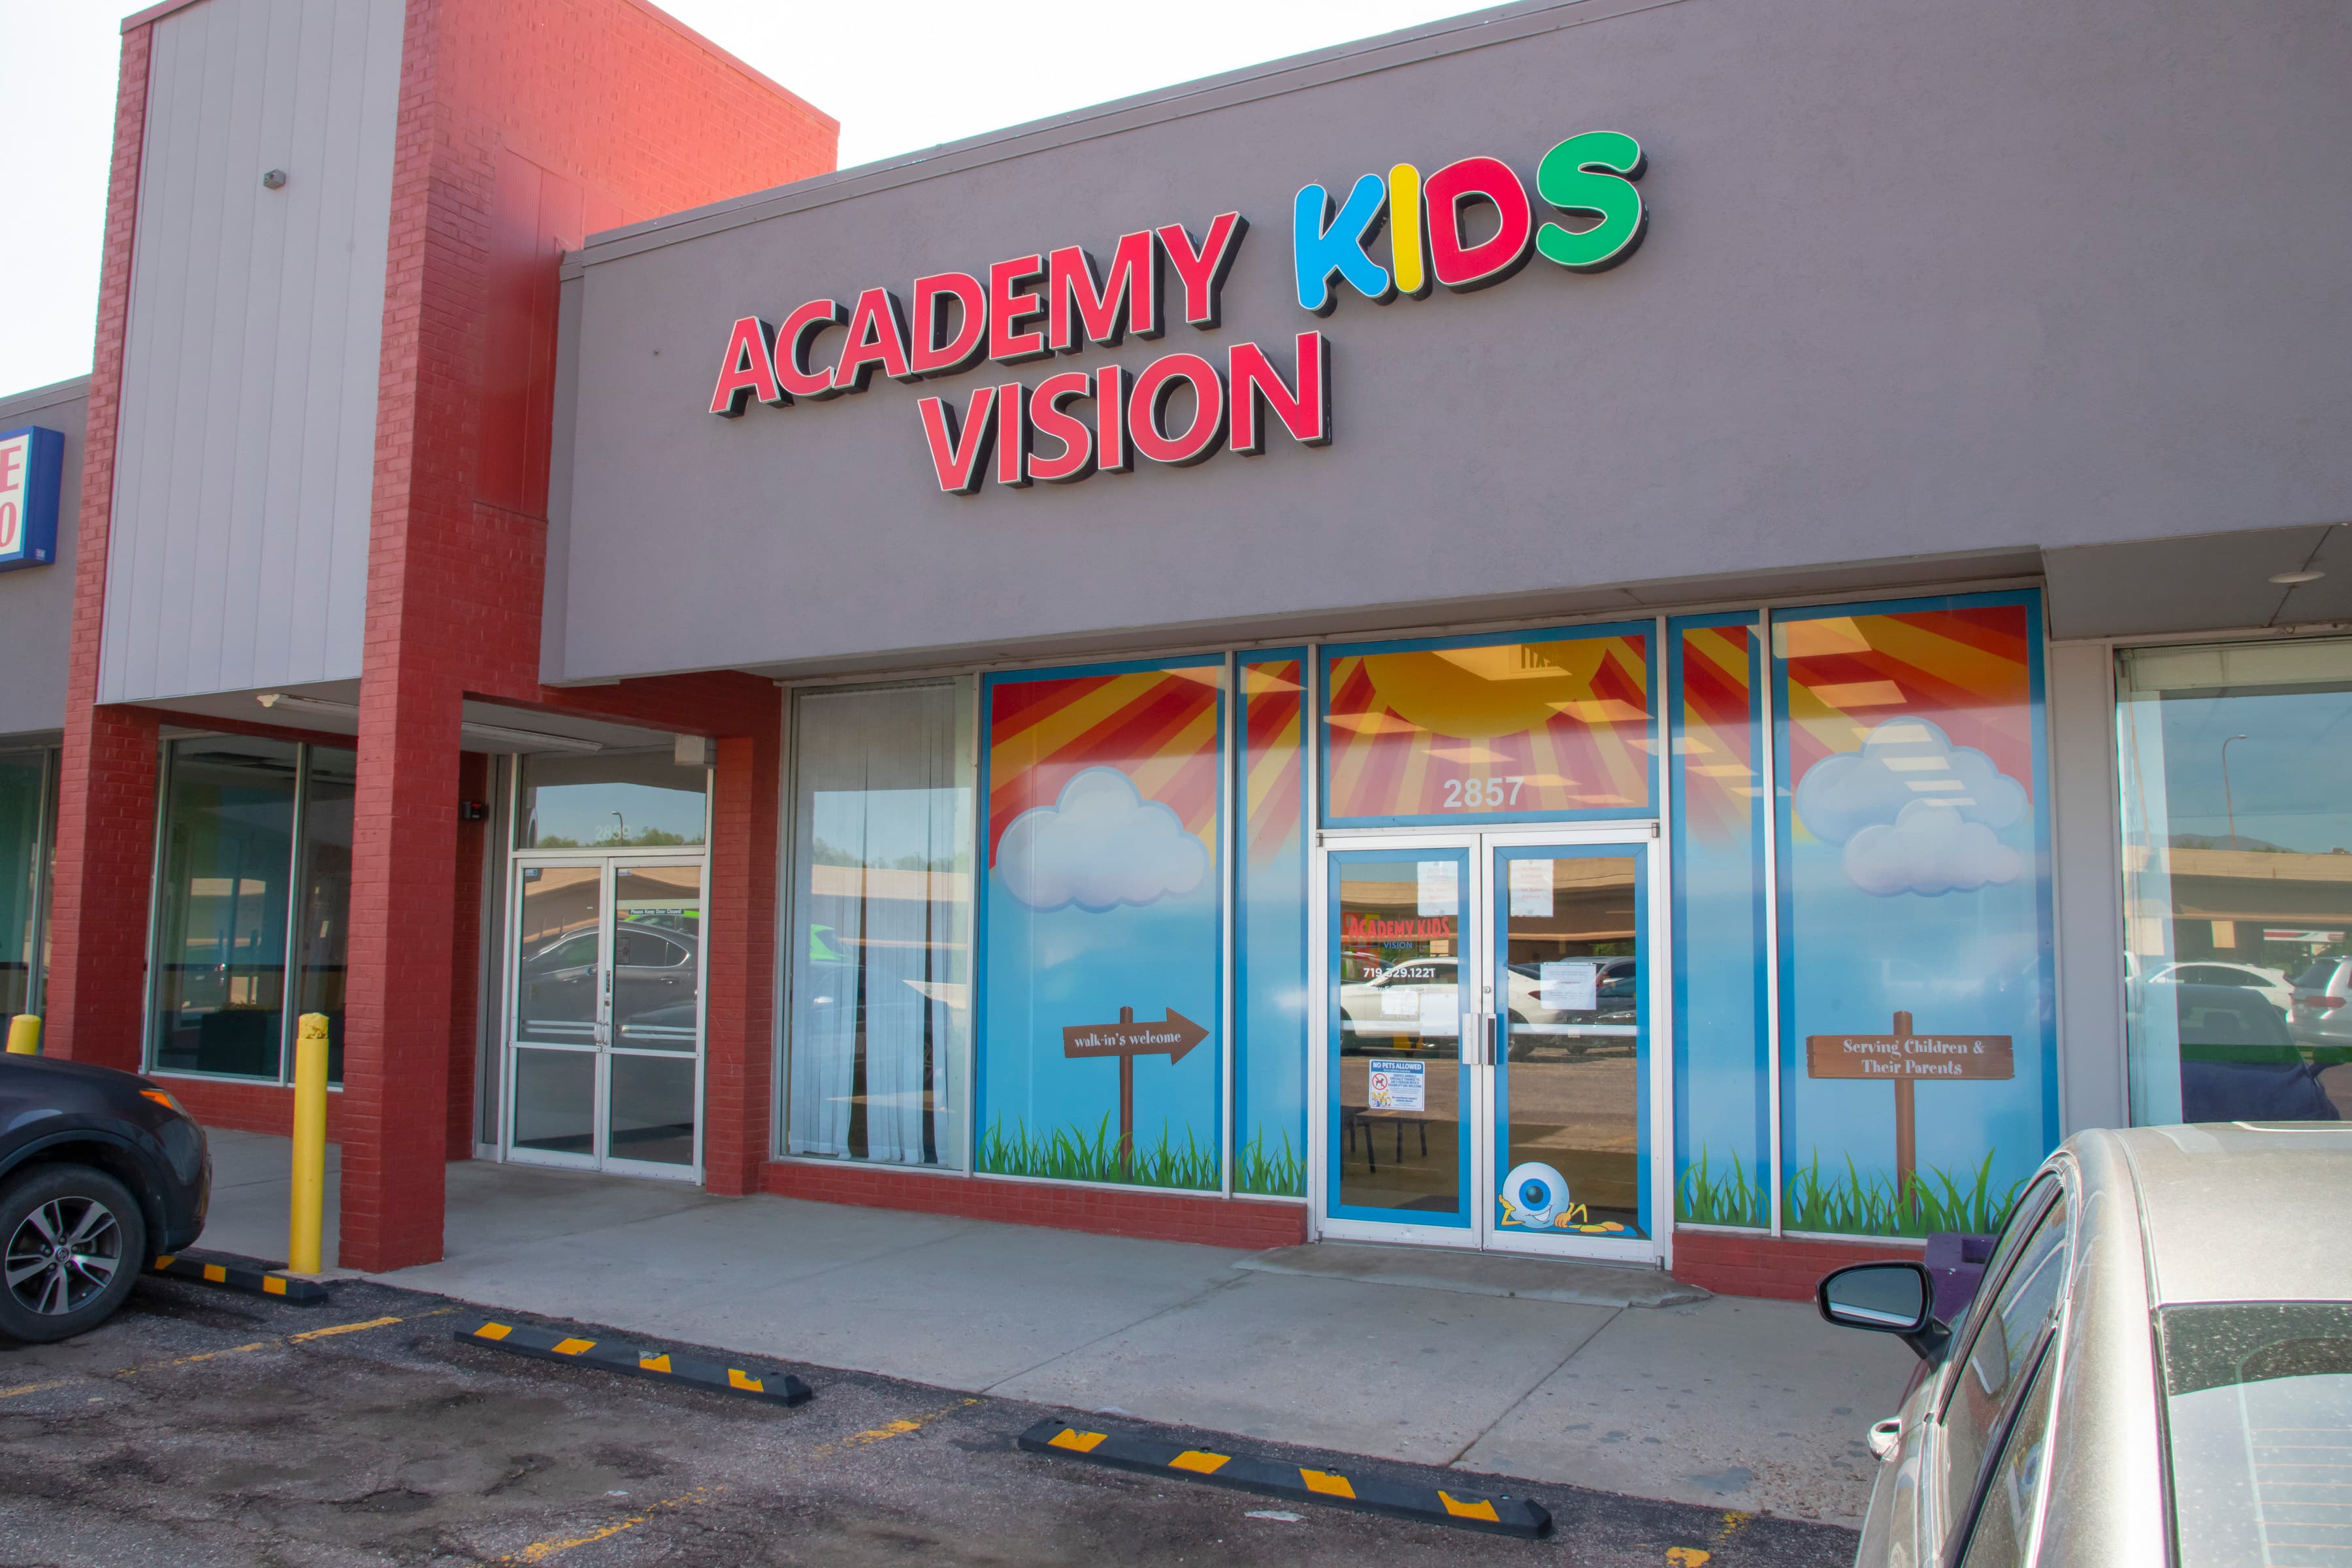 A colorful sign outside of a building in Colorado Springs that says Academy Kids Vision